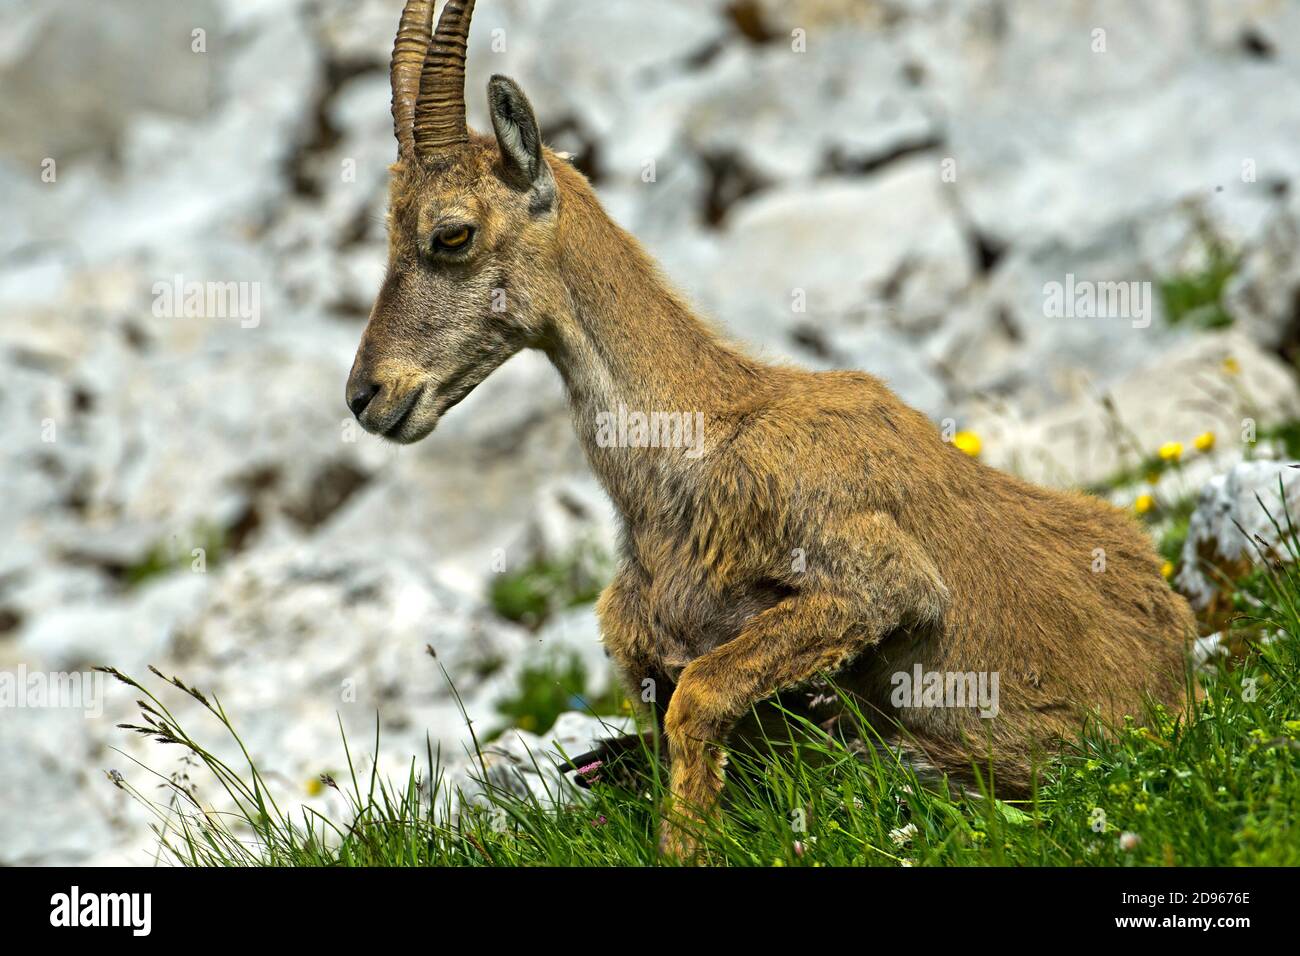 Young Alpine Ibex lying in the grass, Haute-Savoie, France. Stock Photo